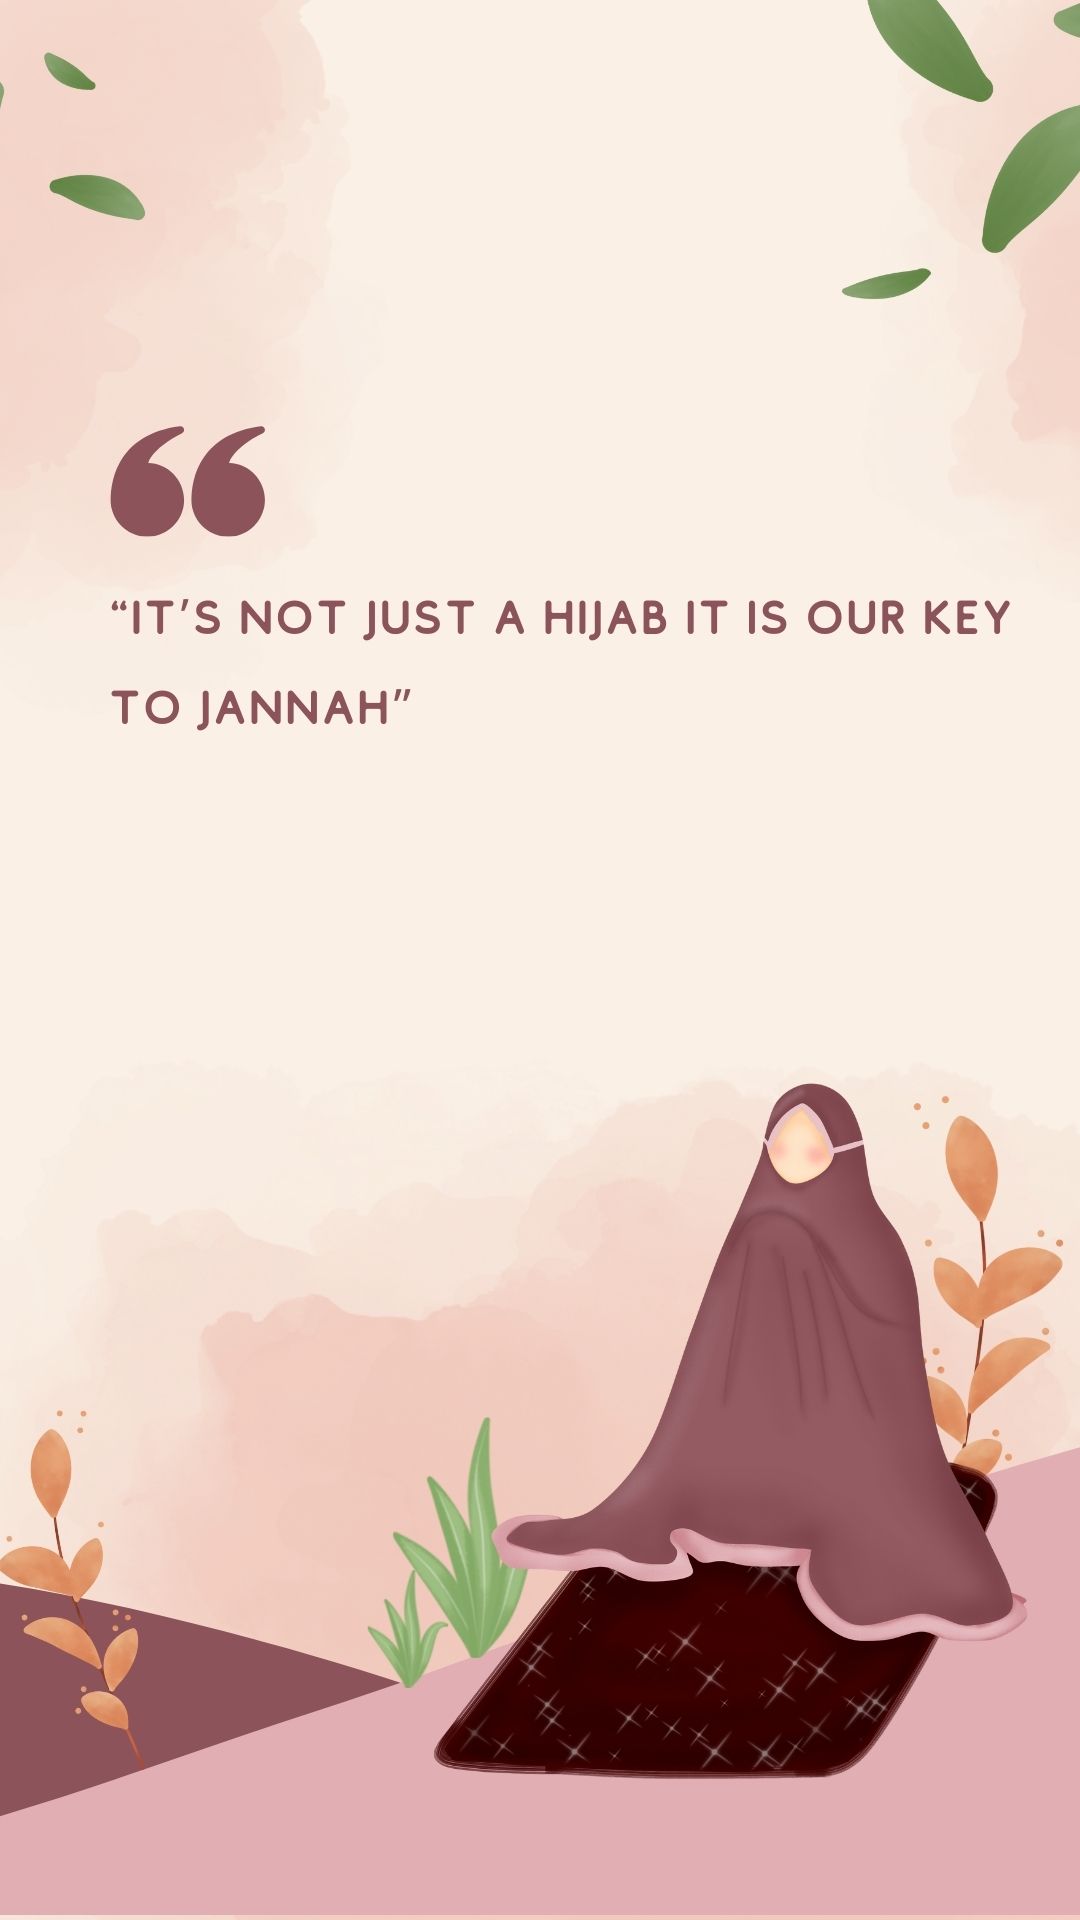 “It’s not just  a HIJAB it is our key to JANNAH”